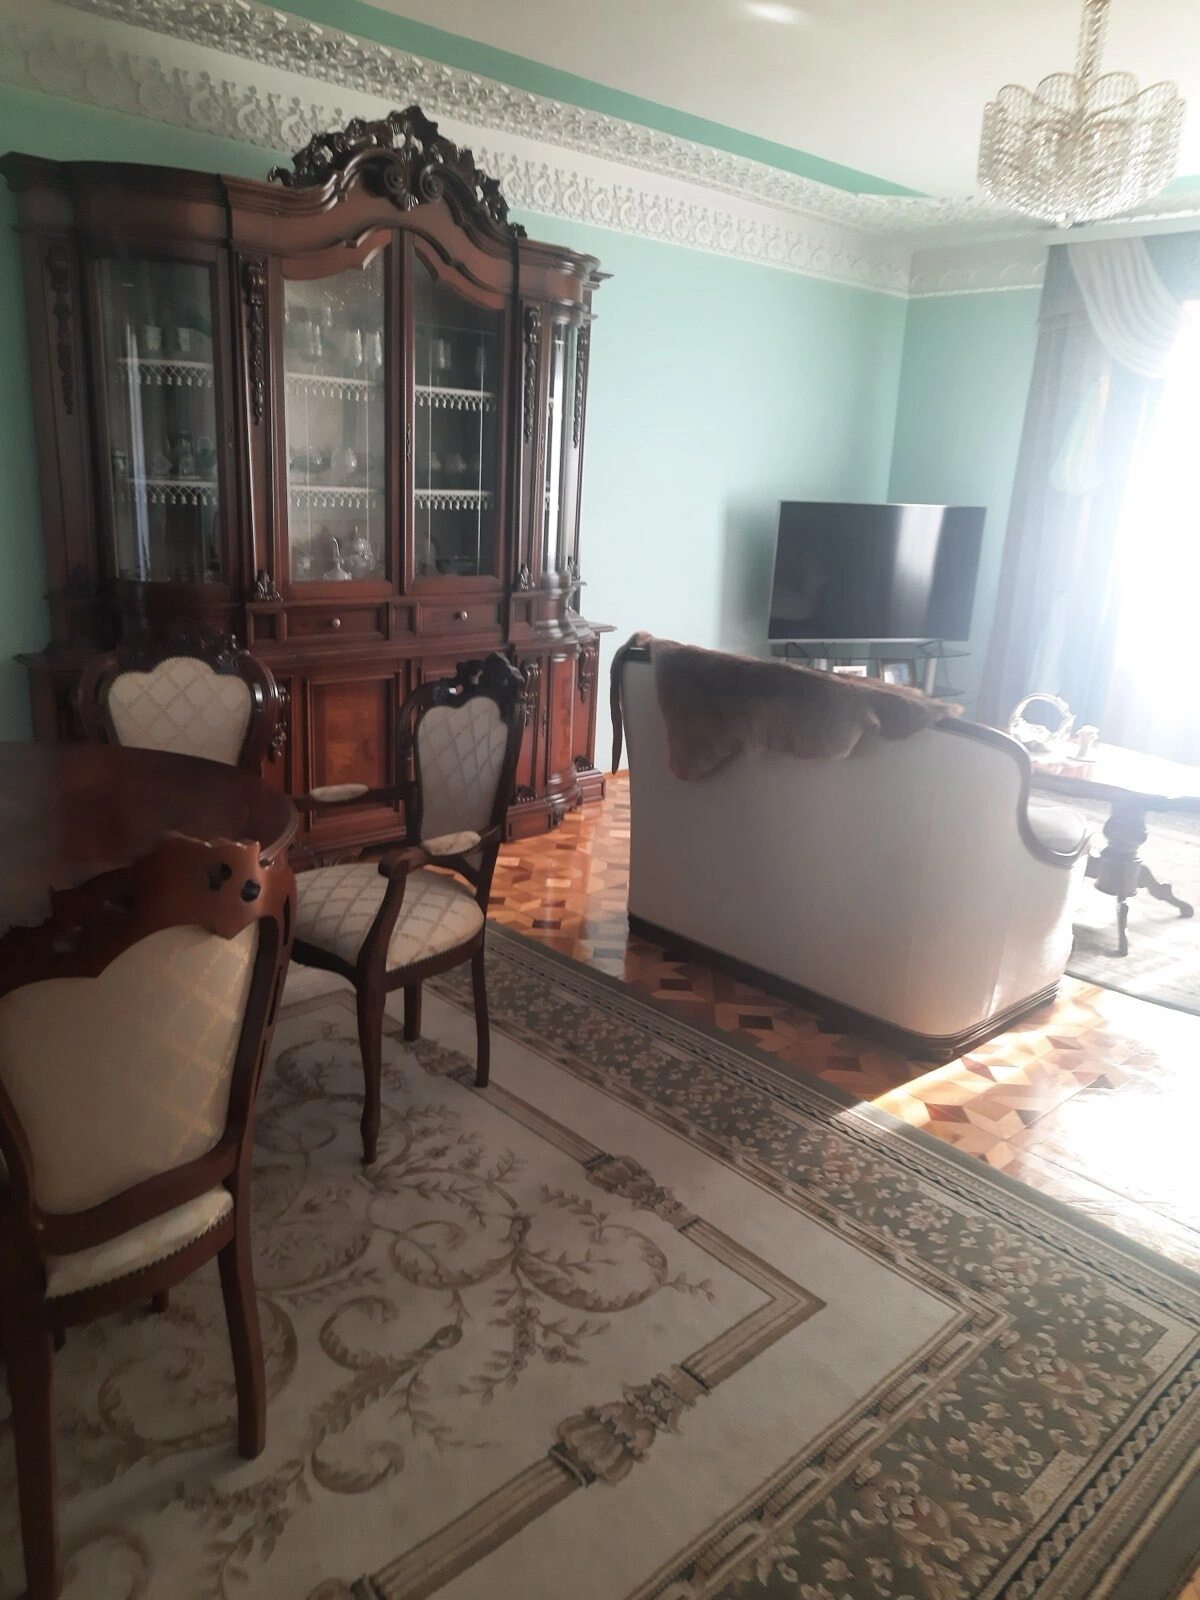 House for sale. 370 m², 3 floors. Petrykov. 